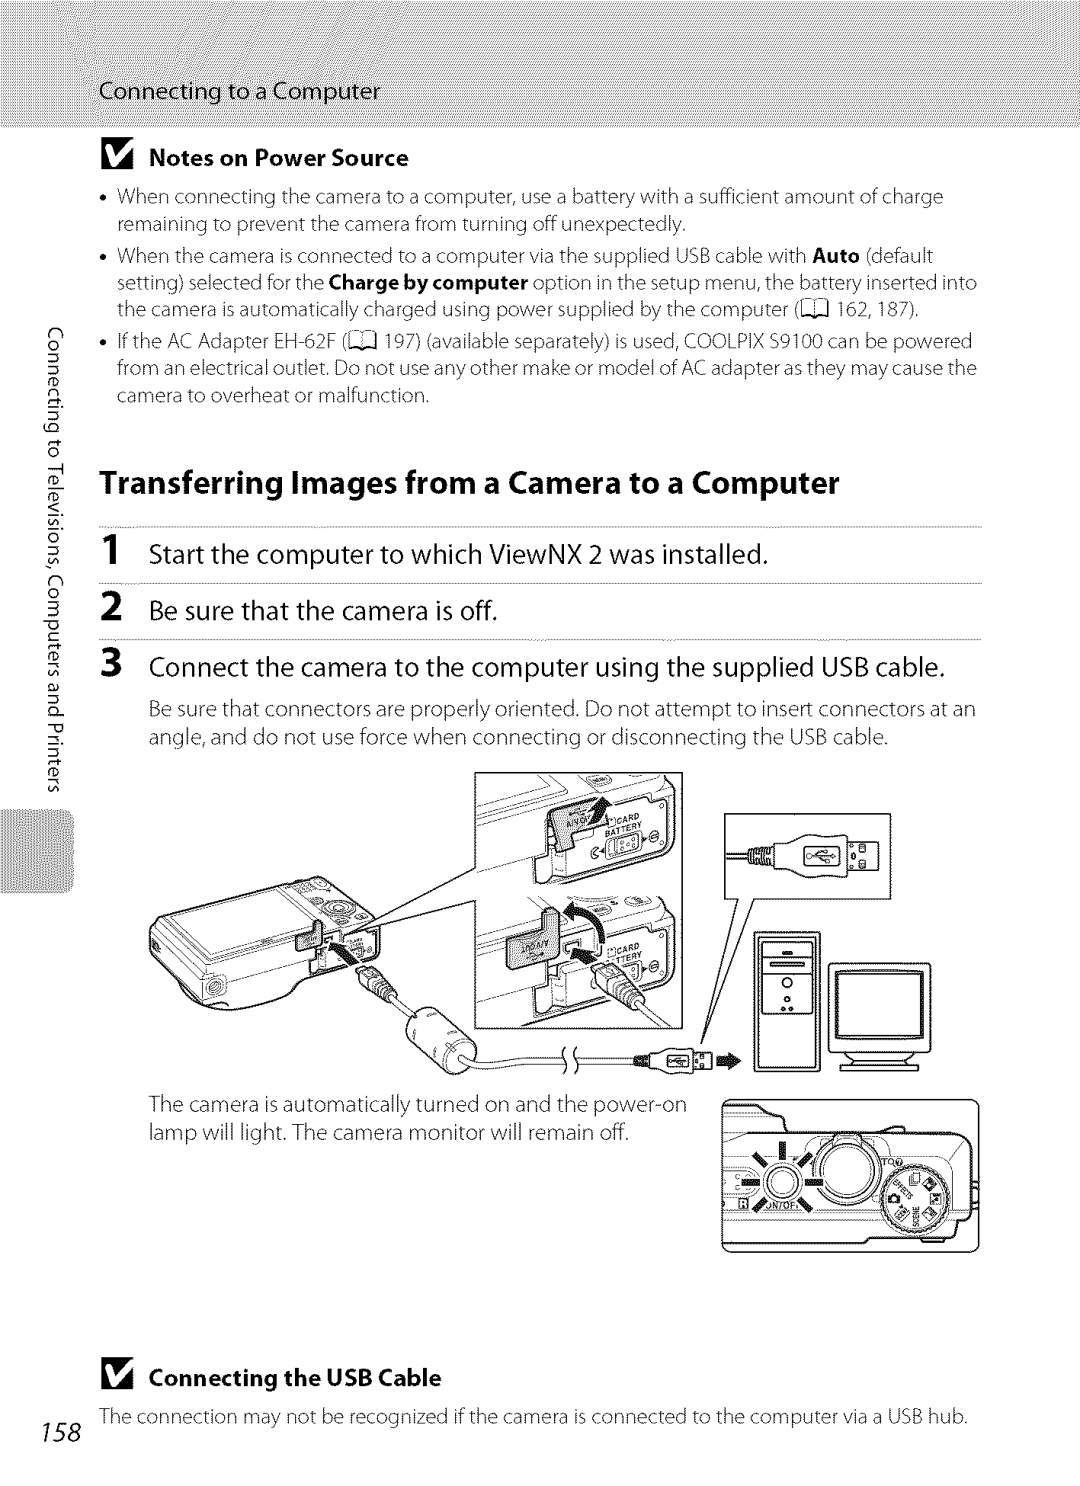 Nikon S9100 user manual Transferring Images from a Camera to a Computer, Be sure, that the camera Js off 